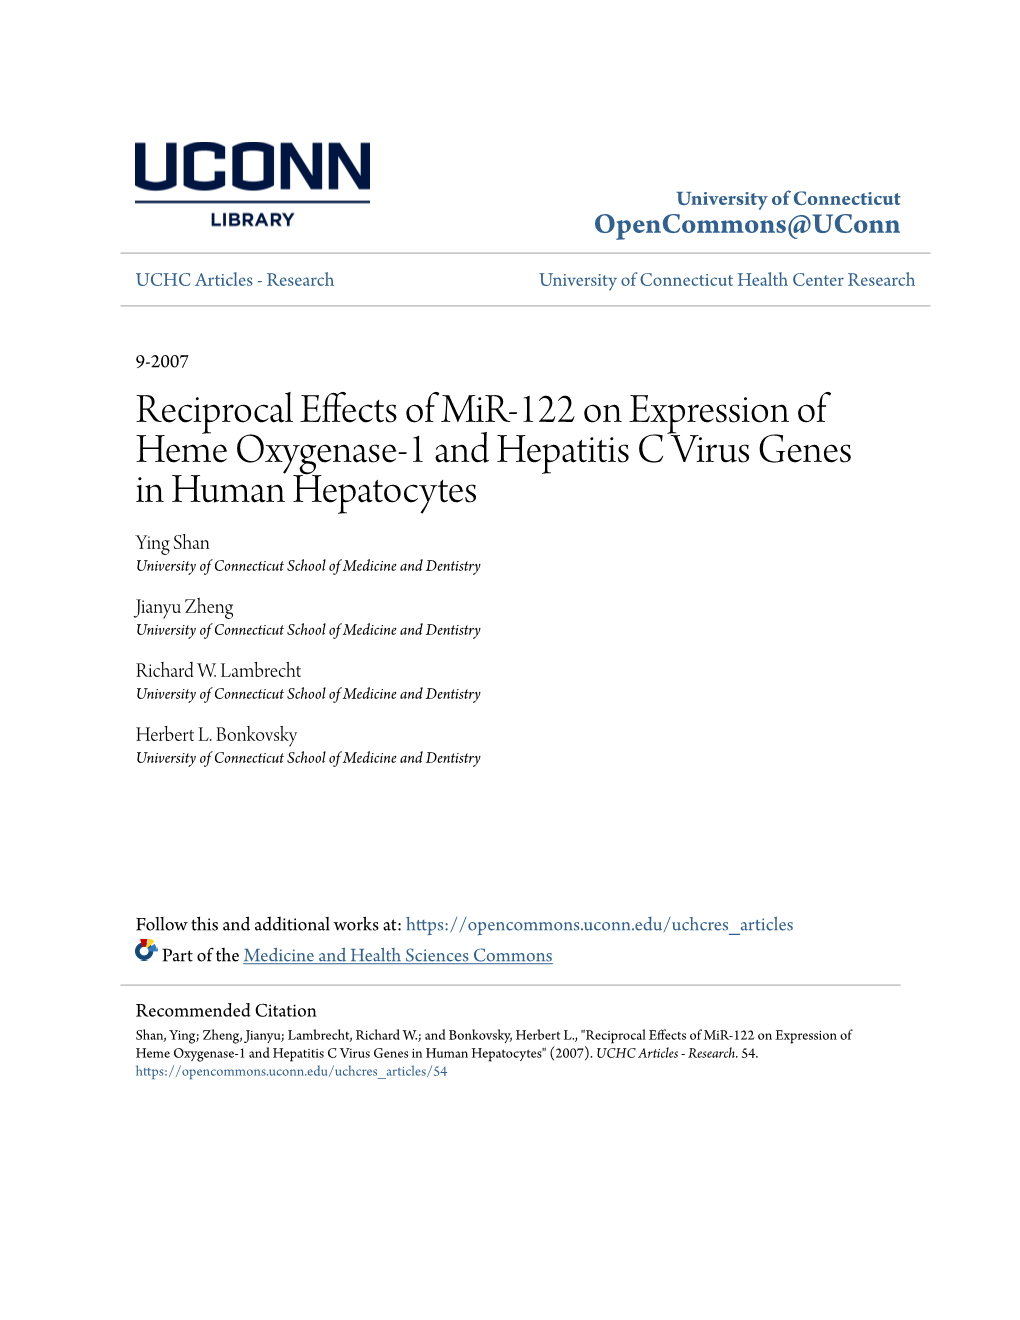 Reciprocal Effects of Mir-122 on Expression of Heme Oxygenase-1